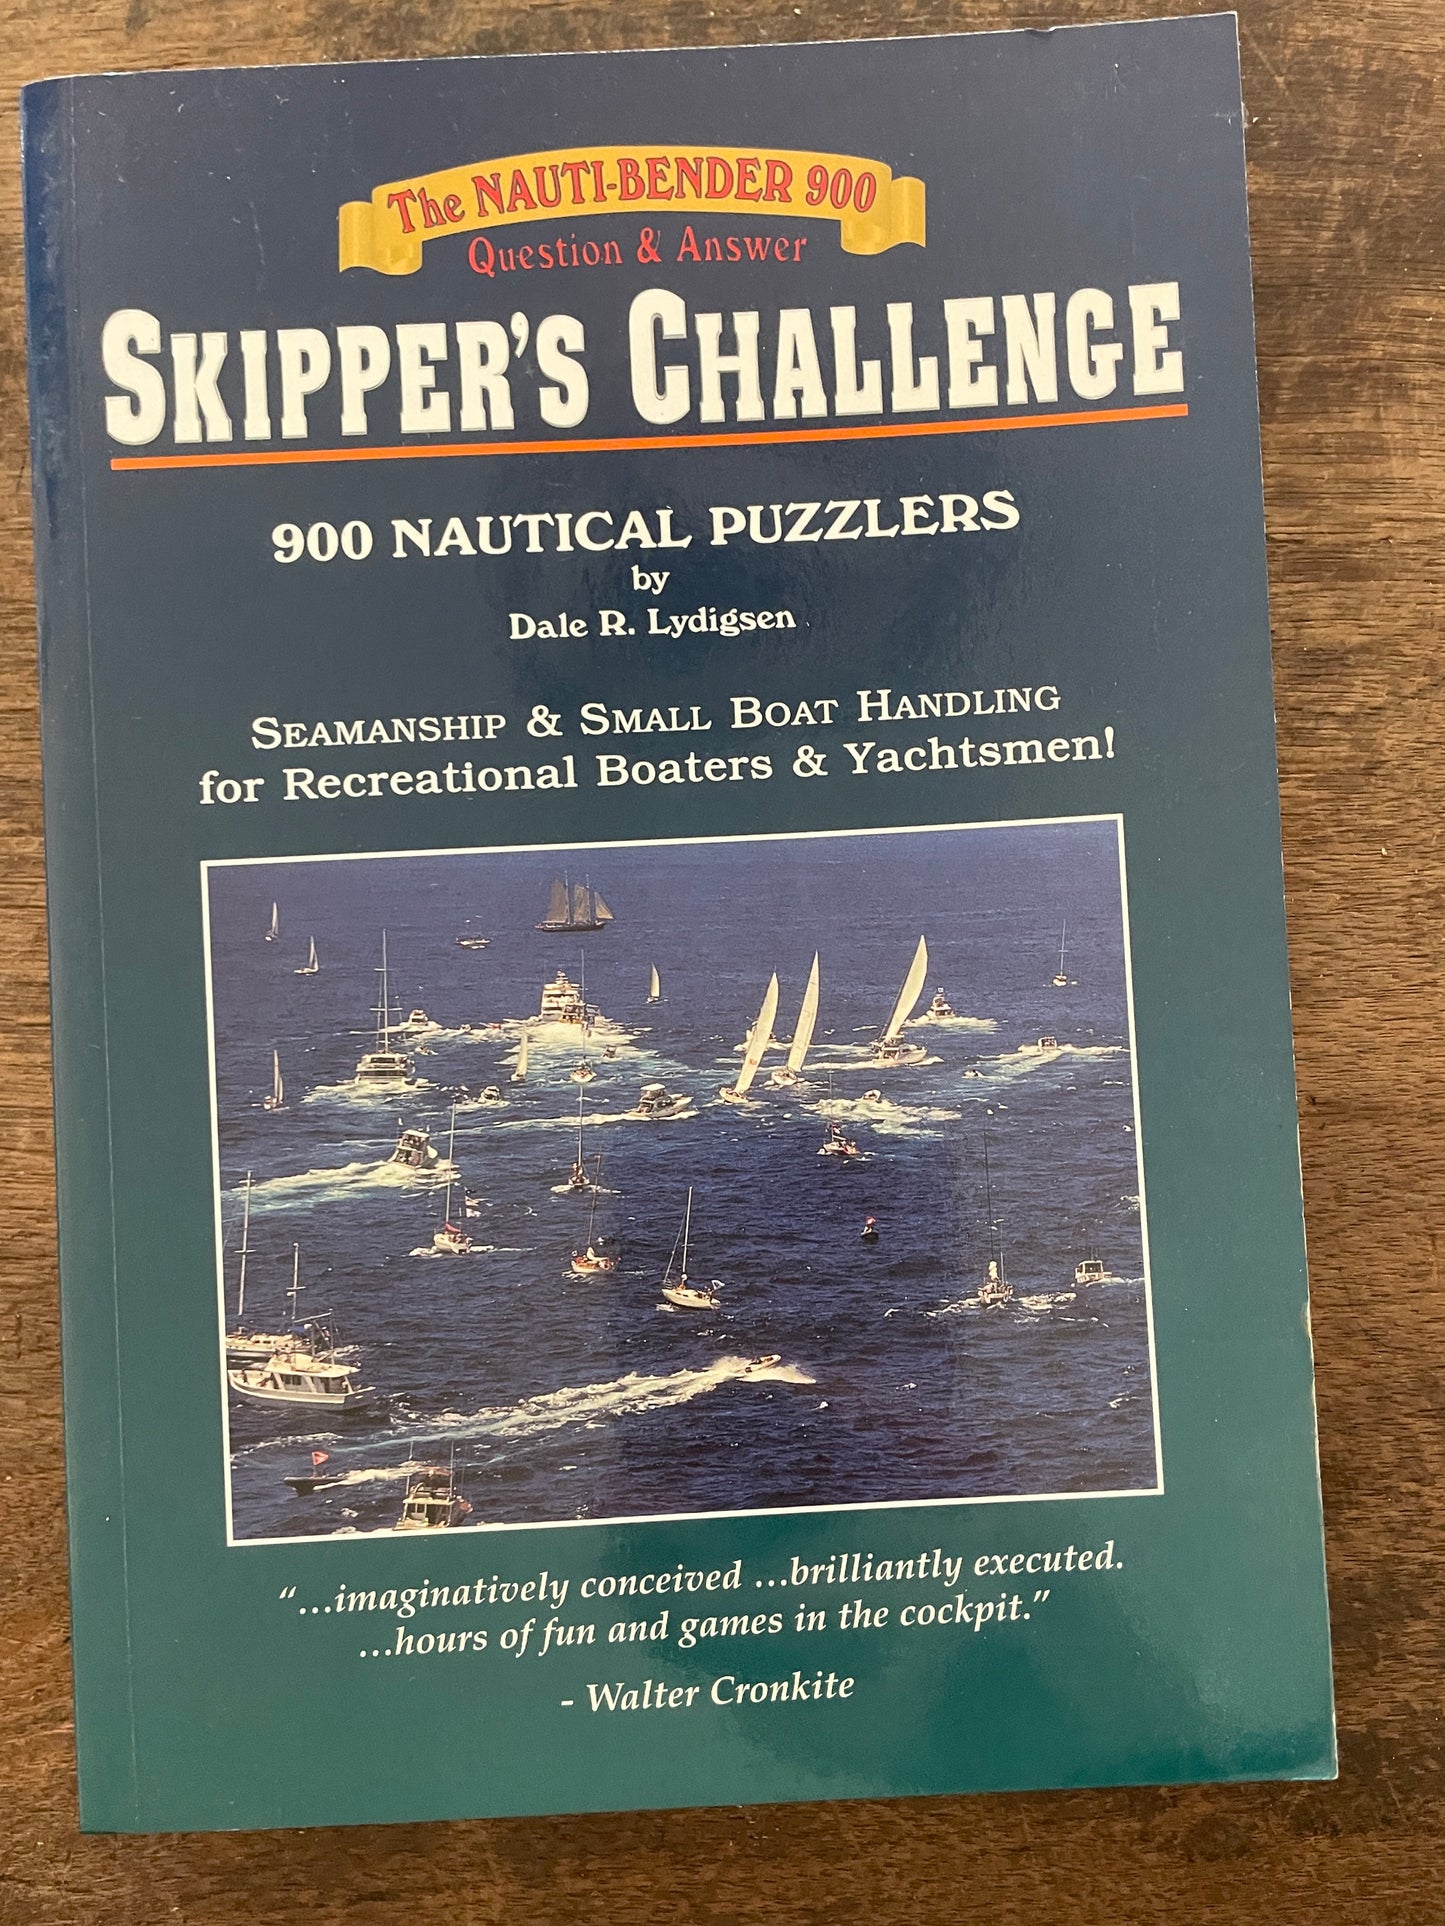 Skippers Challenge 900 Nautical Puzzlers BY Dale R. Lydigsen